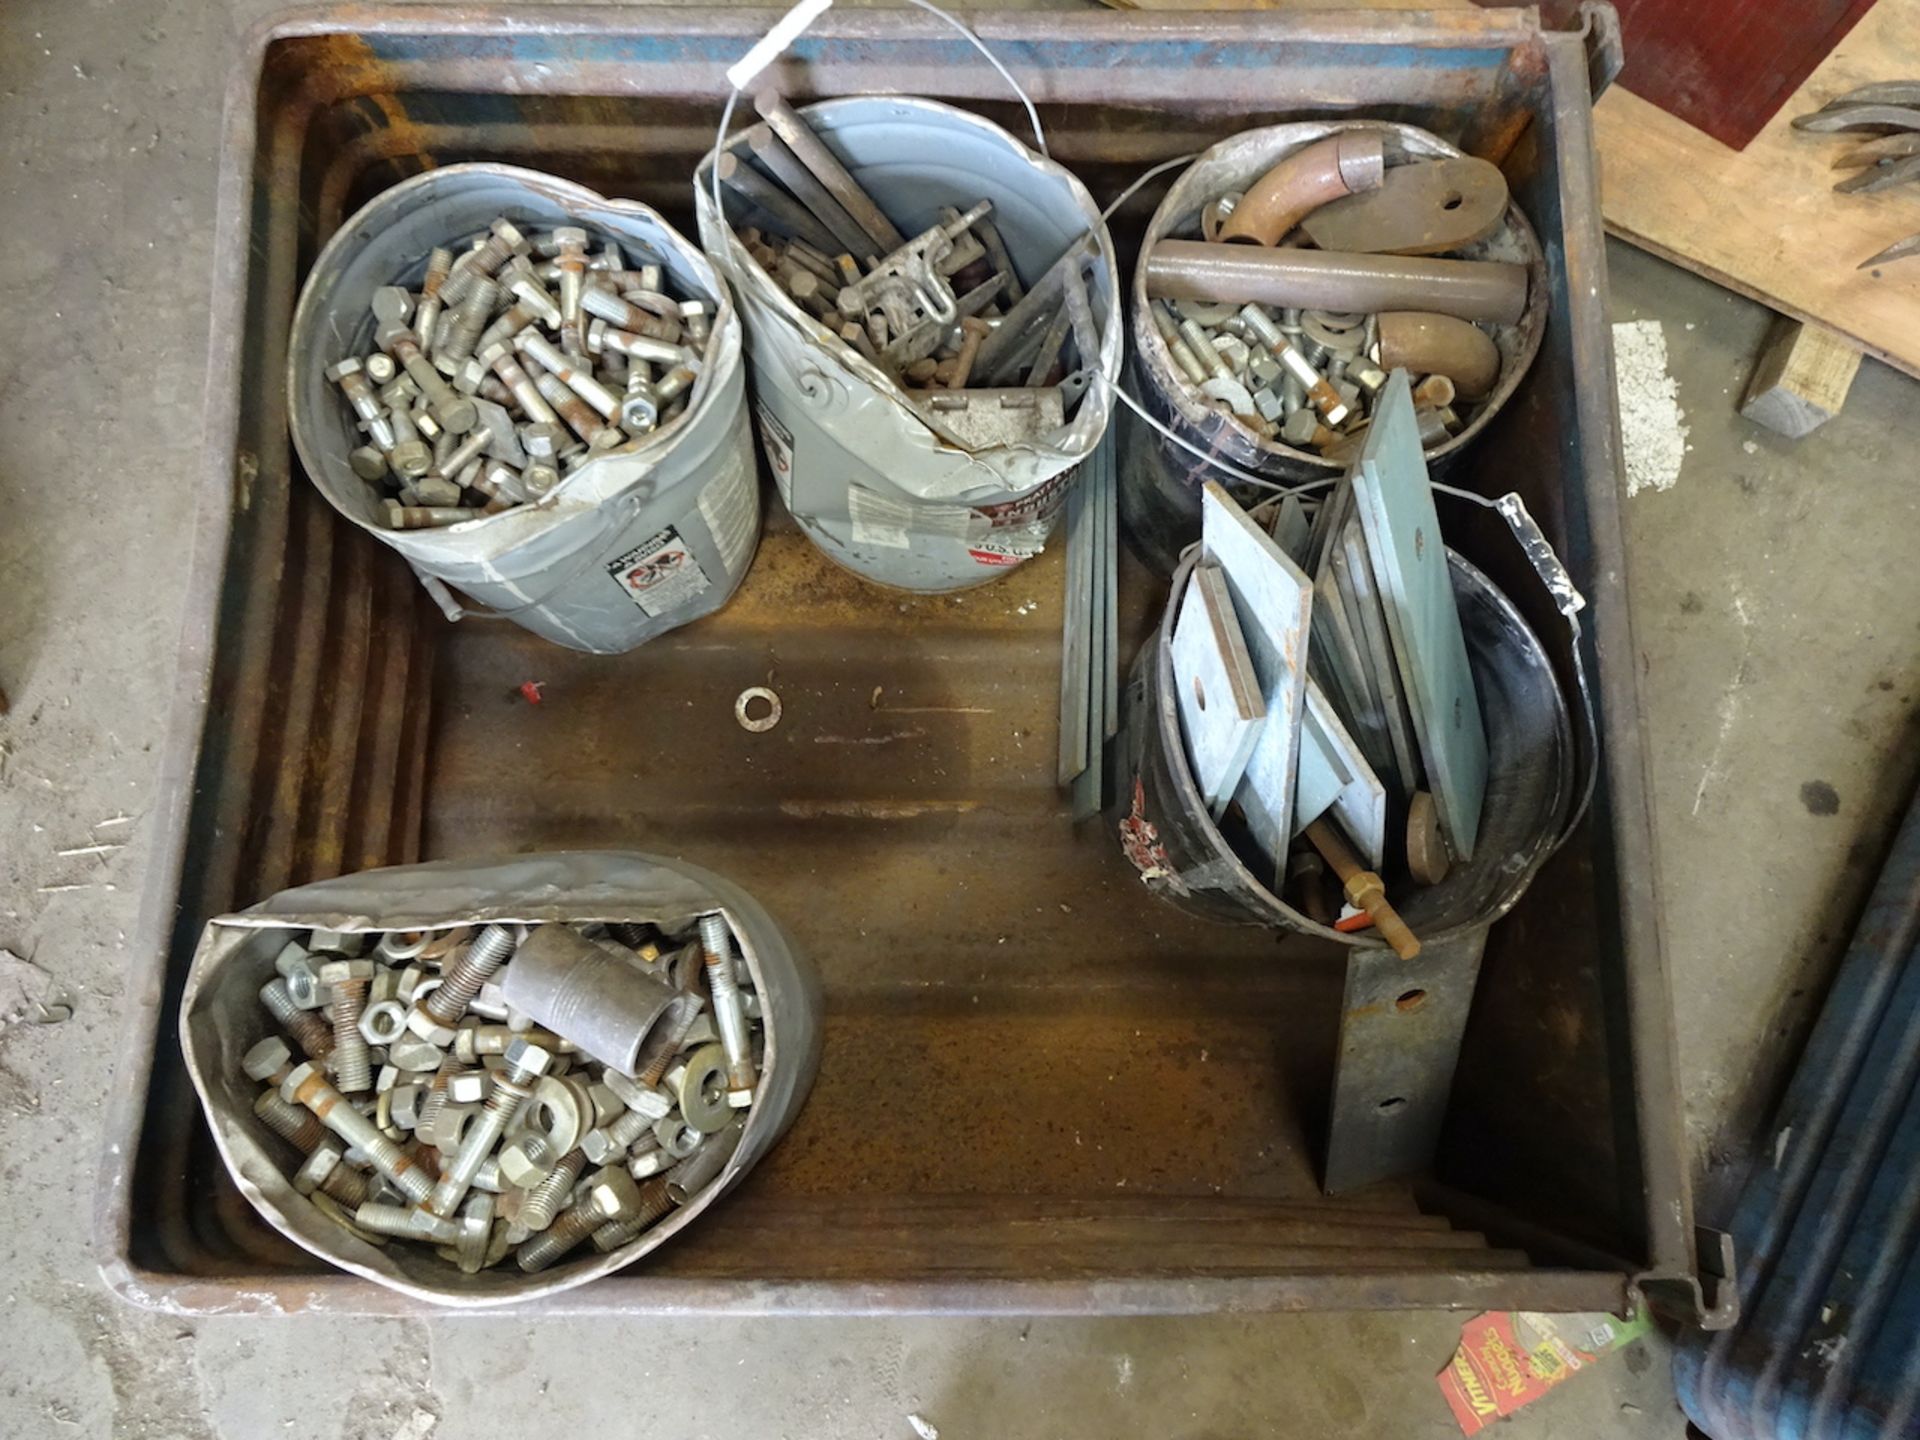 LOT: Assorted Bolts, Nuts, etc. (includes corrugated bin)